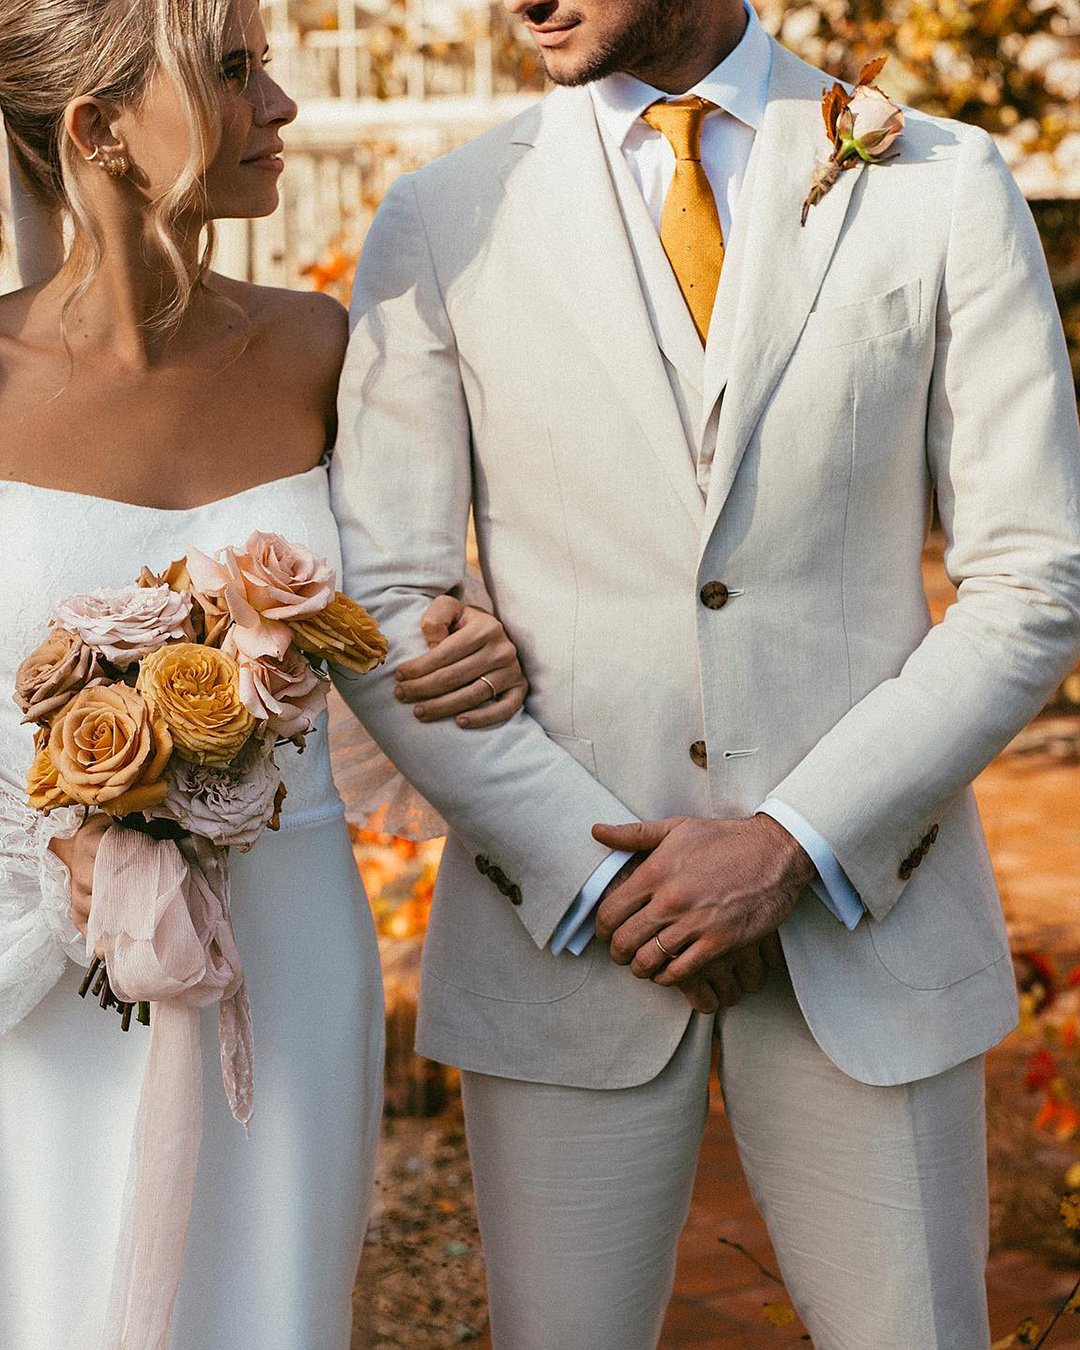 groom suits grey jacket with tie and bouttonieres chelseawhitephotog